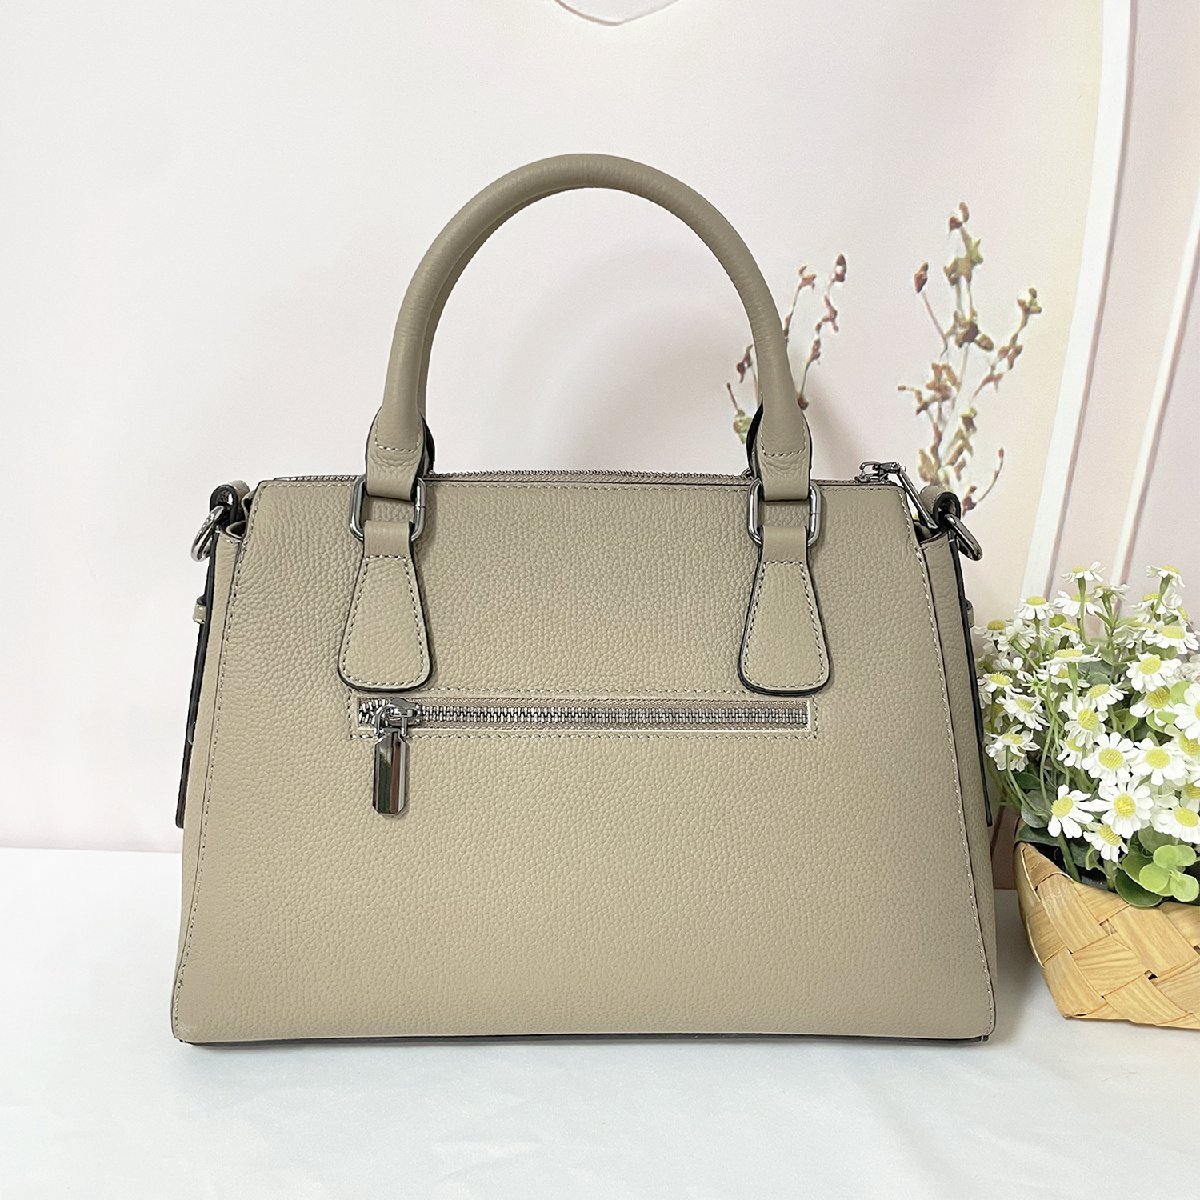  on goods * shoulder bag regular price 12 ten thousand *Emmauela* Italy * milano departure * fine quality cow leather leather high capacity diagonal ... in stock 2WAY Classic office 